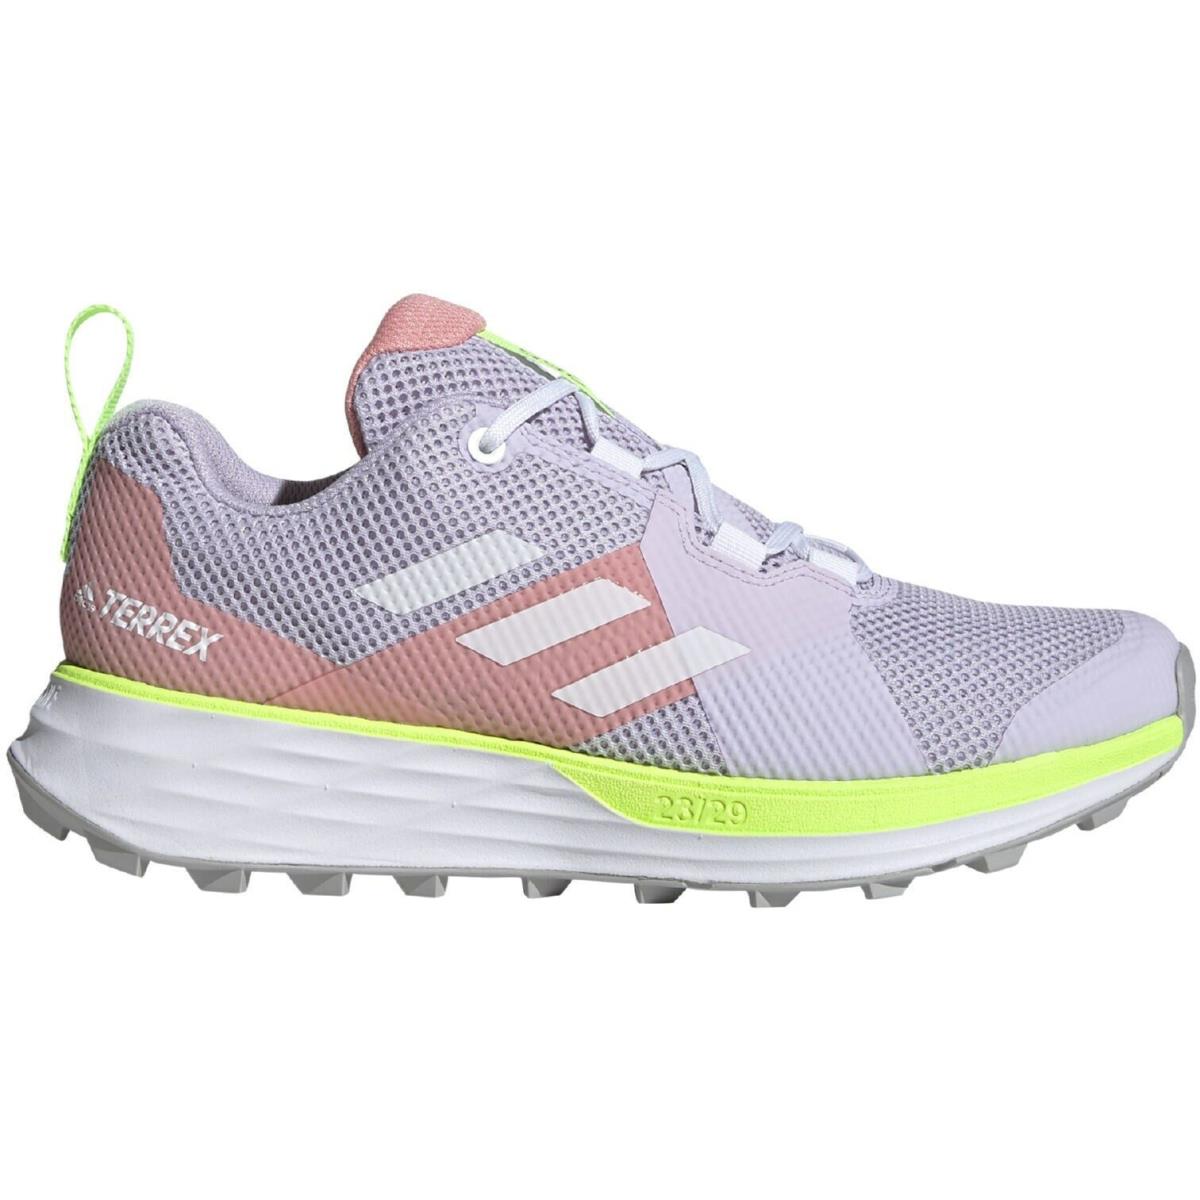 Adidas Outdoor Women`s Terrex Two Trail Running Shoes Sz 6 6.5 Lilac/pink - Purple Tint/White/Glory Pink